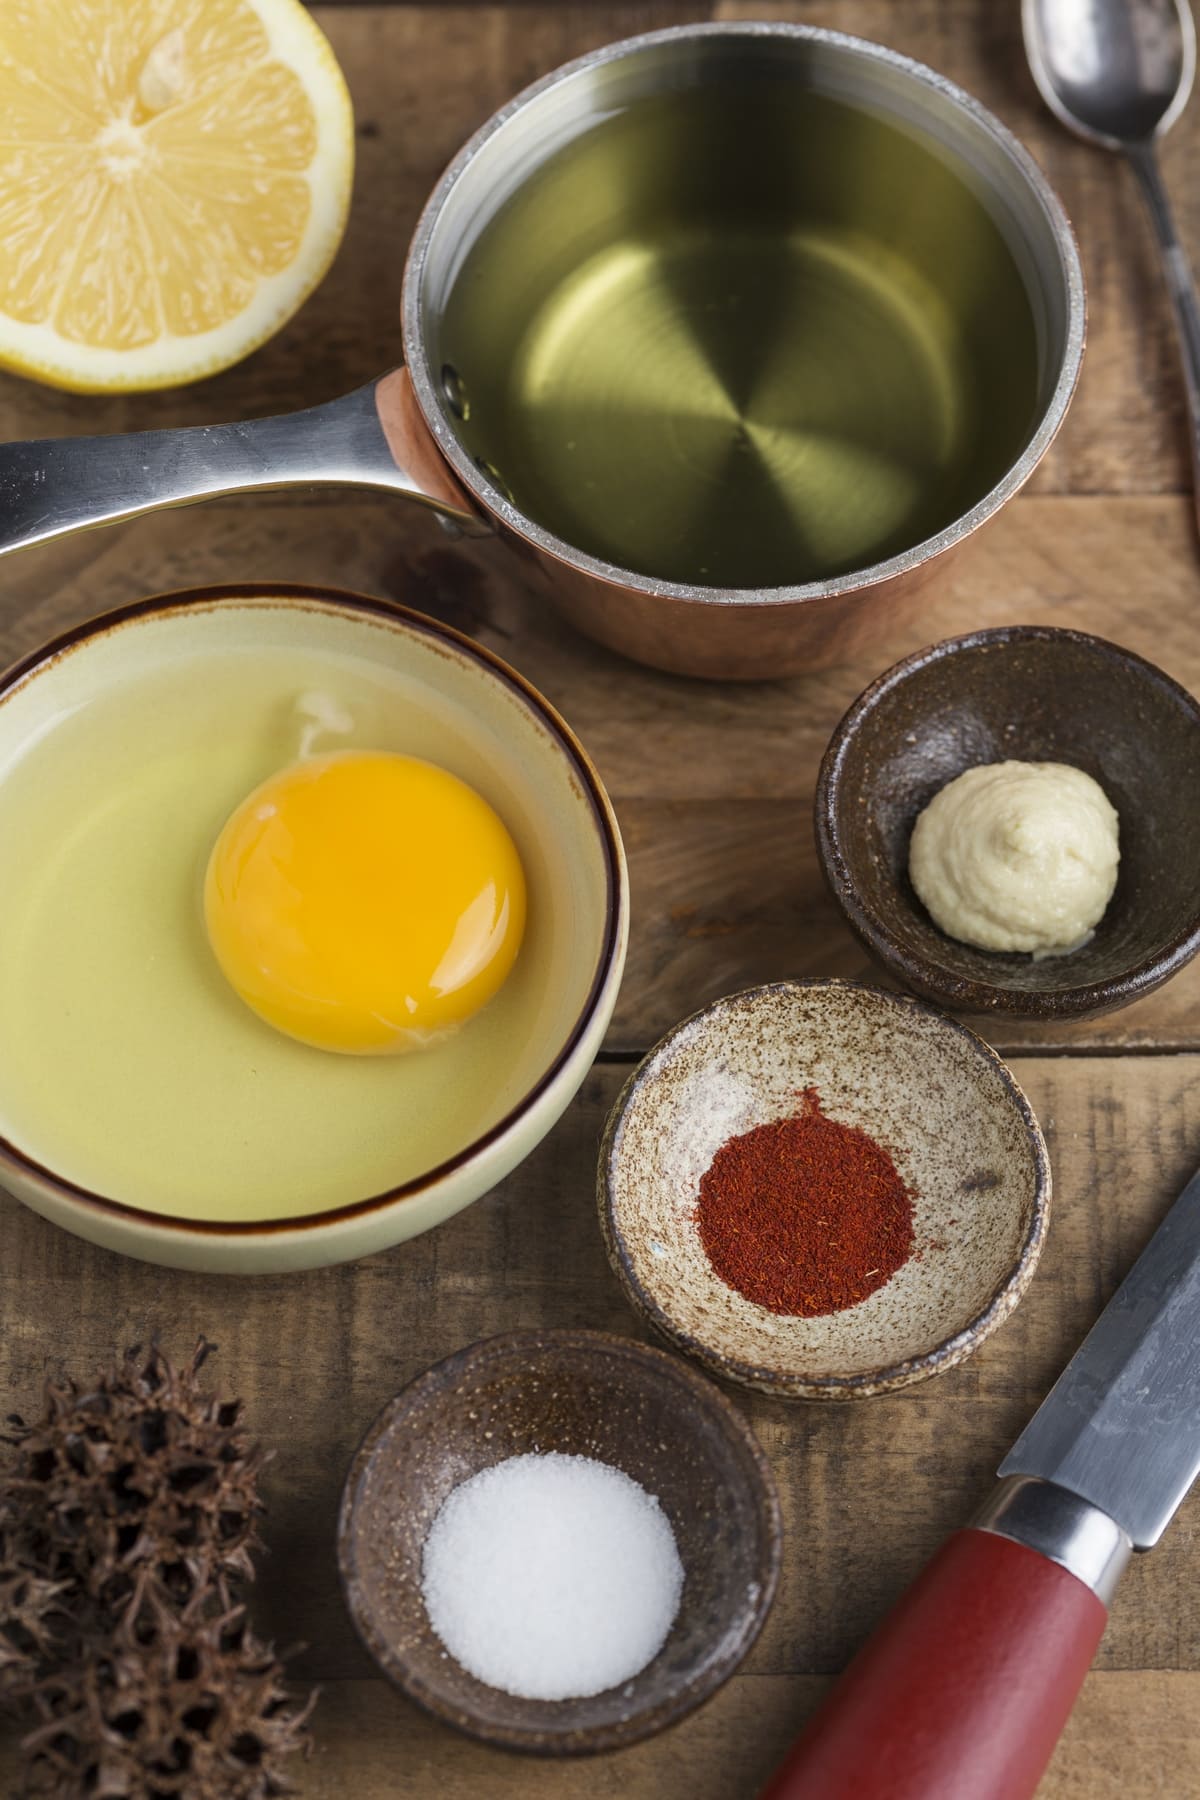 Small bowls containing spices, egg, oil and a half lemon.